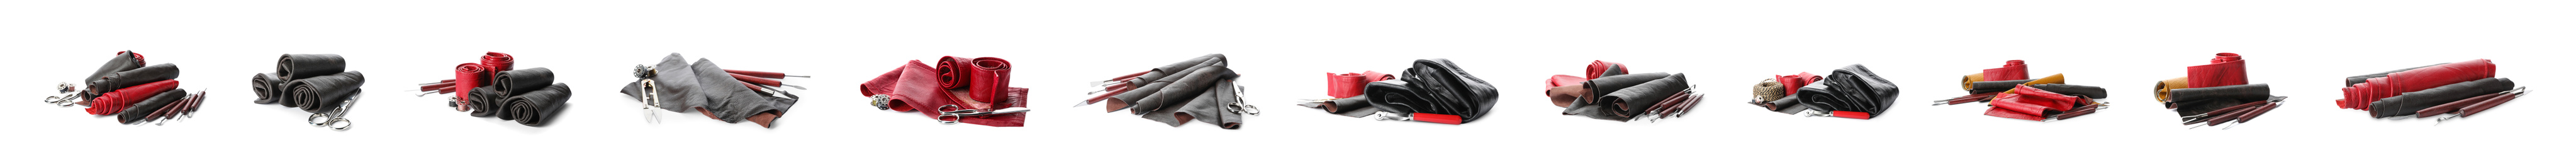 Set with leather samples and craftsman tools on white background. Banner design